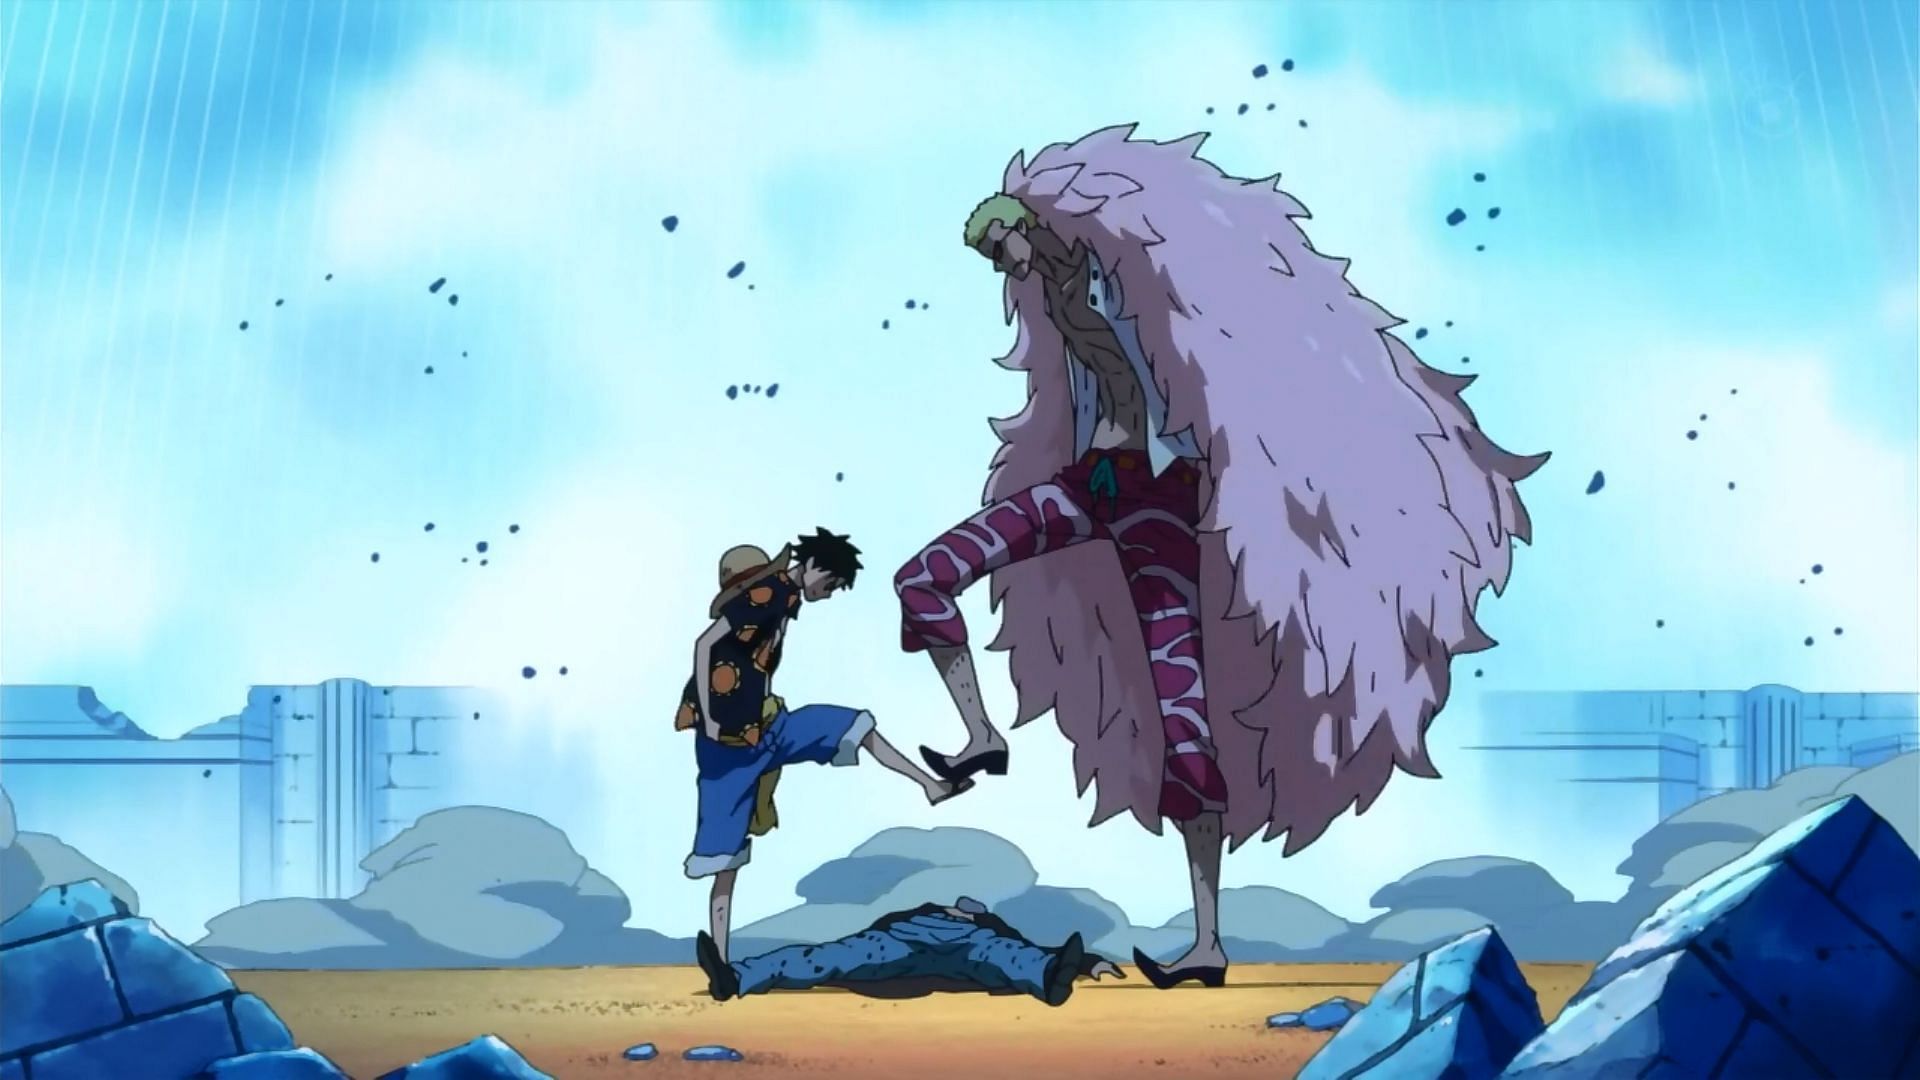 Law as shown during the Dressrosa arc (Image via Toei Animation)